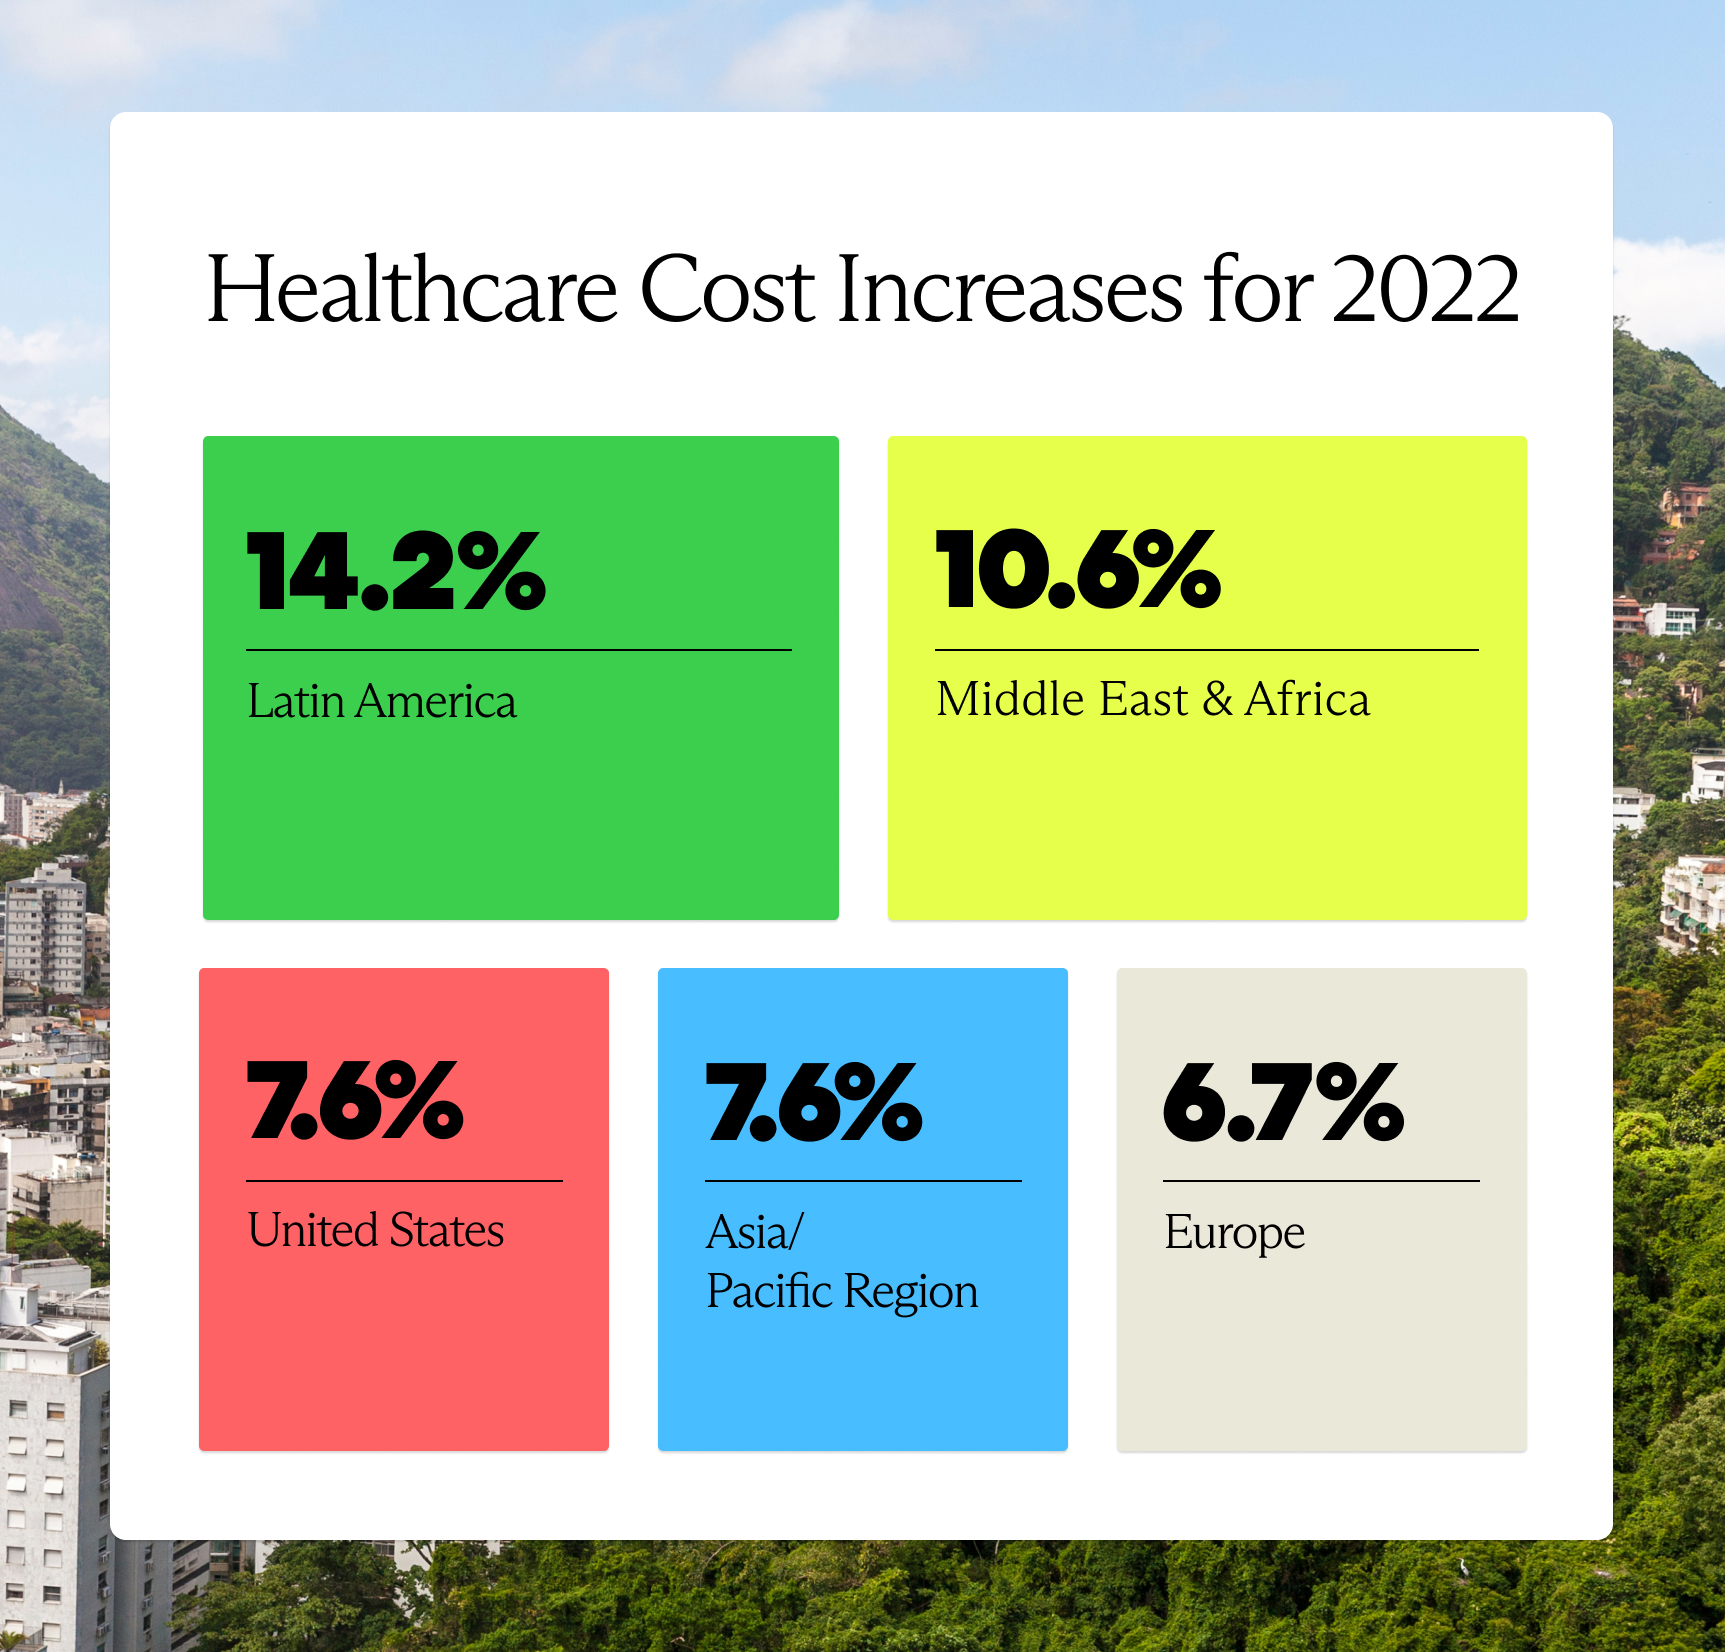 Health care cost increases are expected to be: 14.2% in Latin America, 10.6% in Middle East and Africa, 7.6% in the U.S., 7.6% in Asia/Pacific region, and 6.7% in Europe